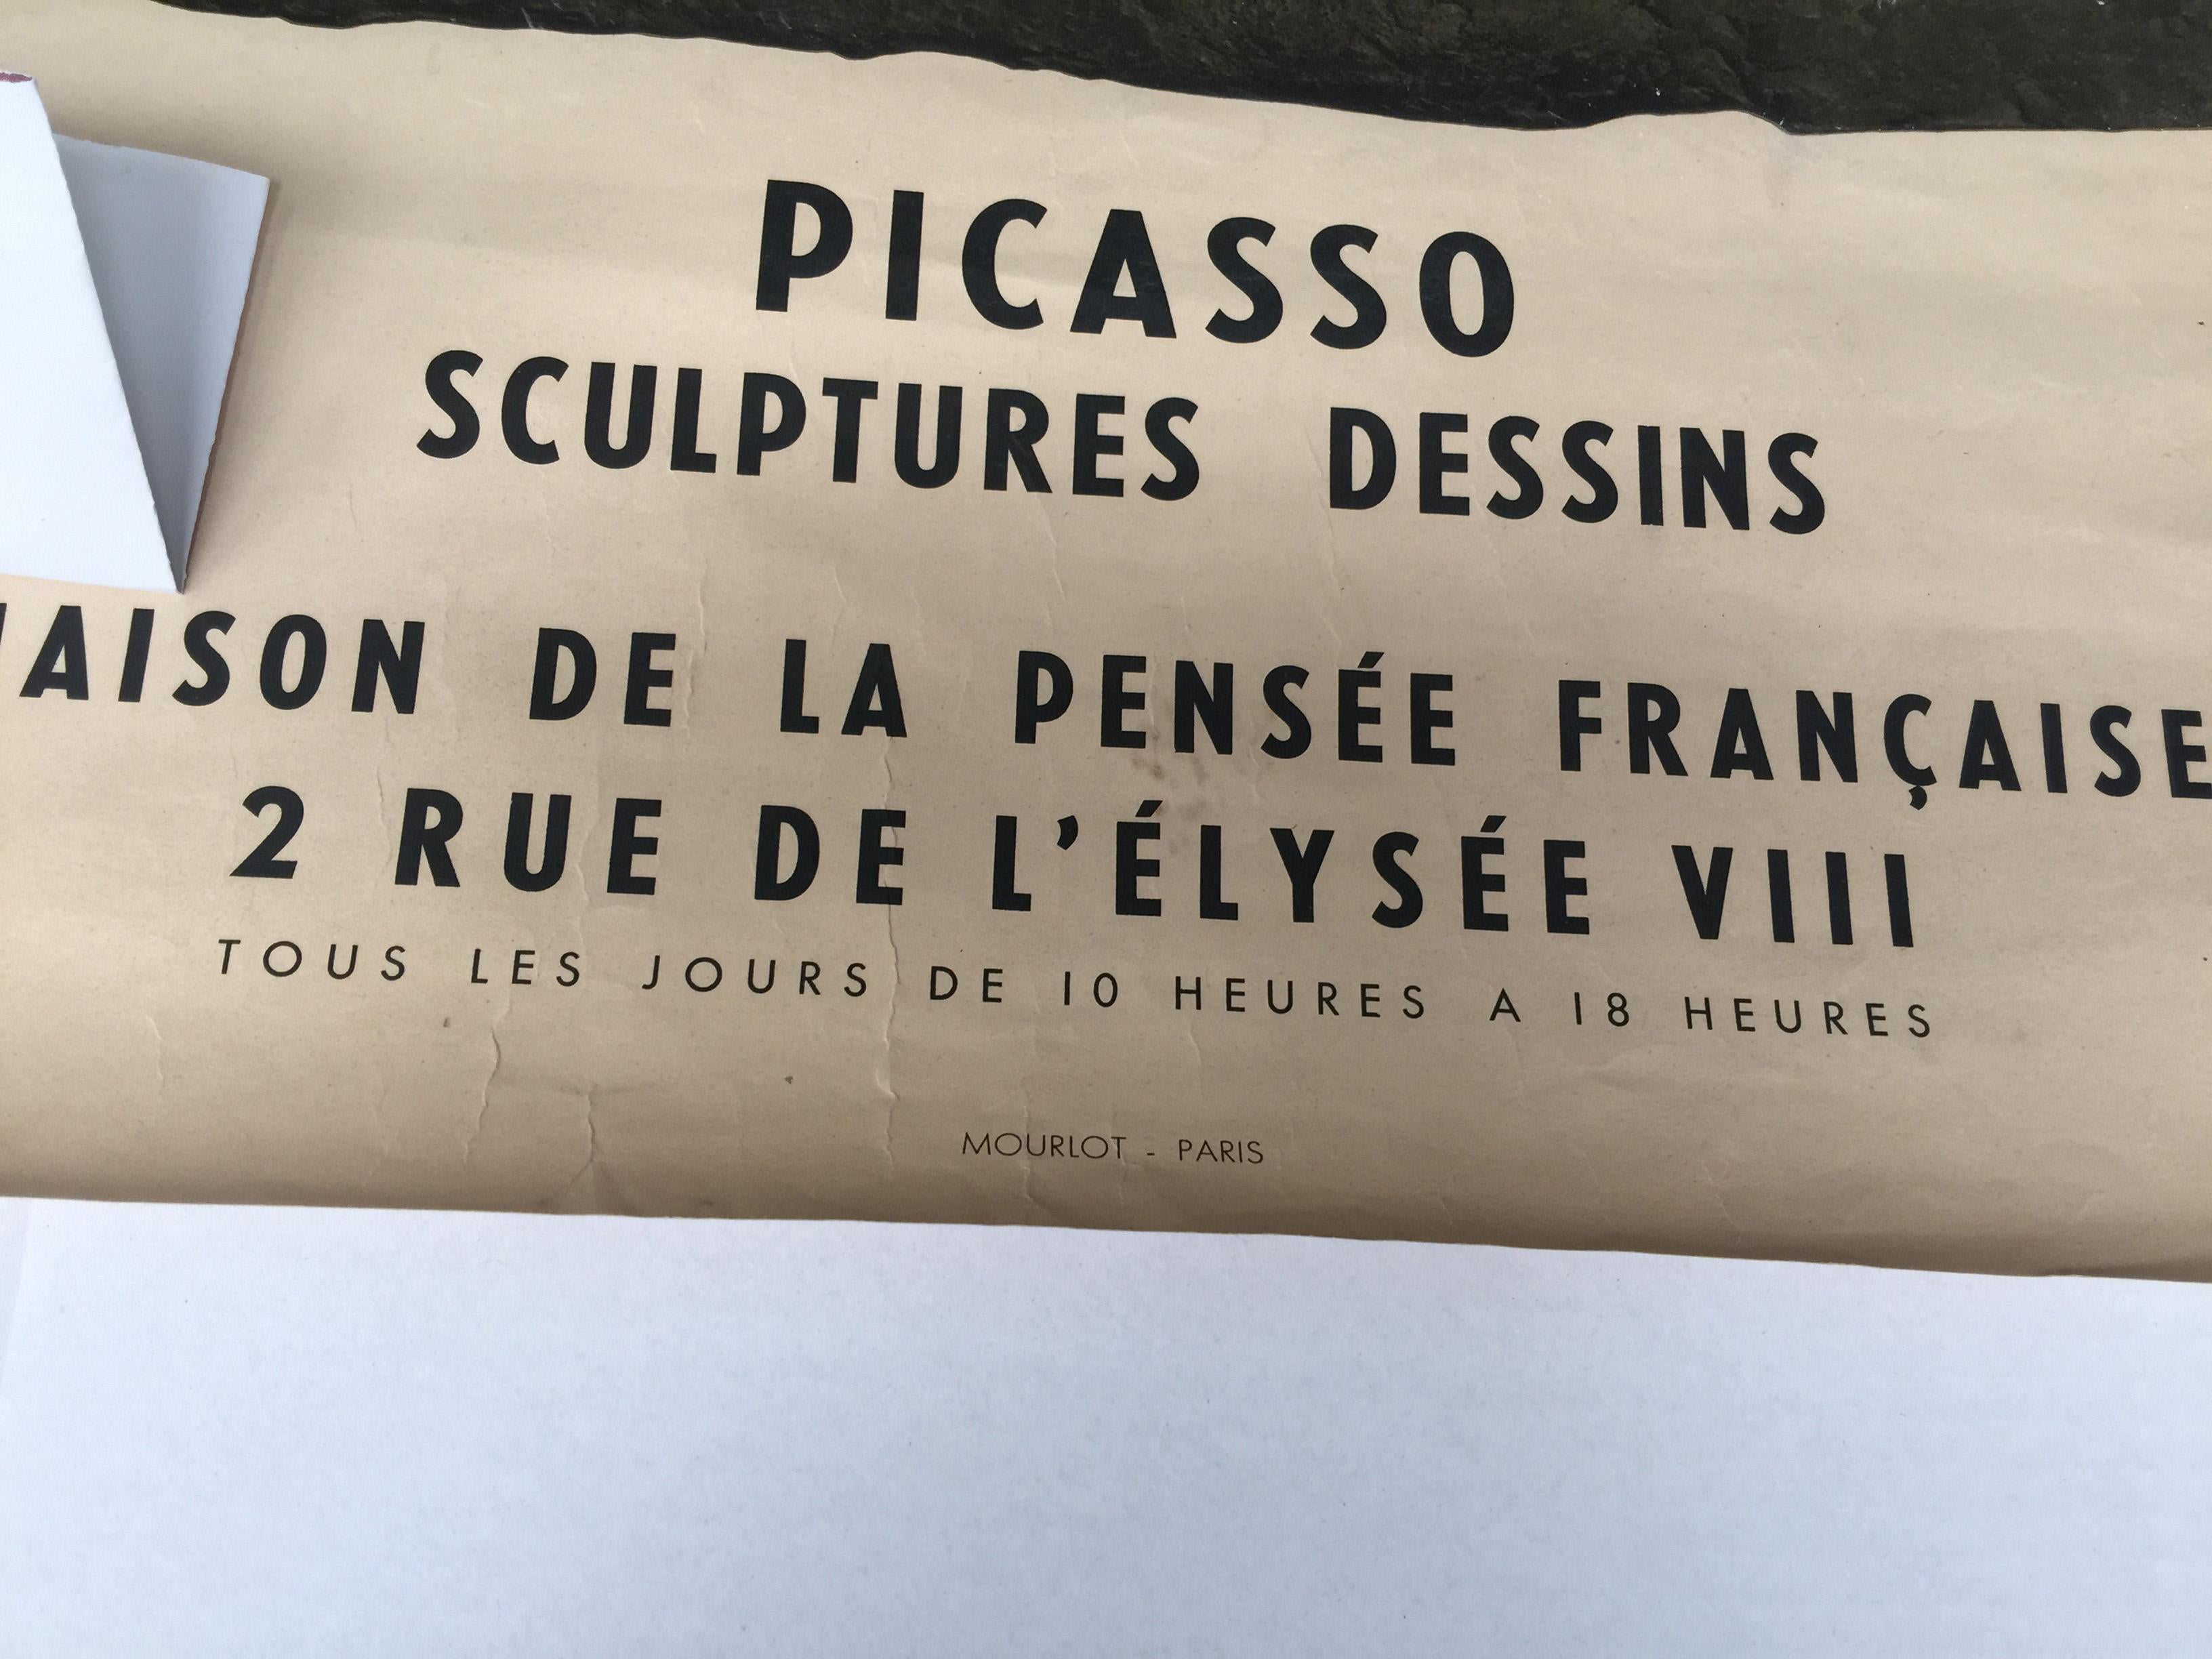 Vintage Pablo Picasso poster created for the 1958 exhibition of sculptures and drawings at the Maison de la Pensee Francaise, Paris.
Printed by Mourlot, Paris.